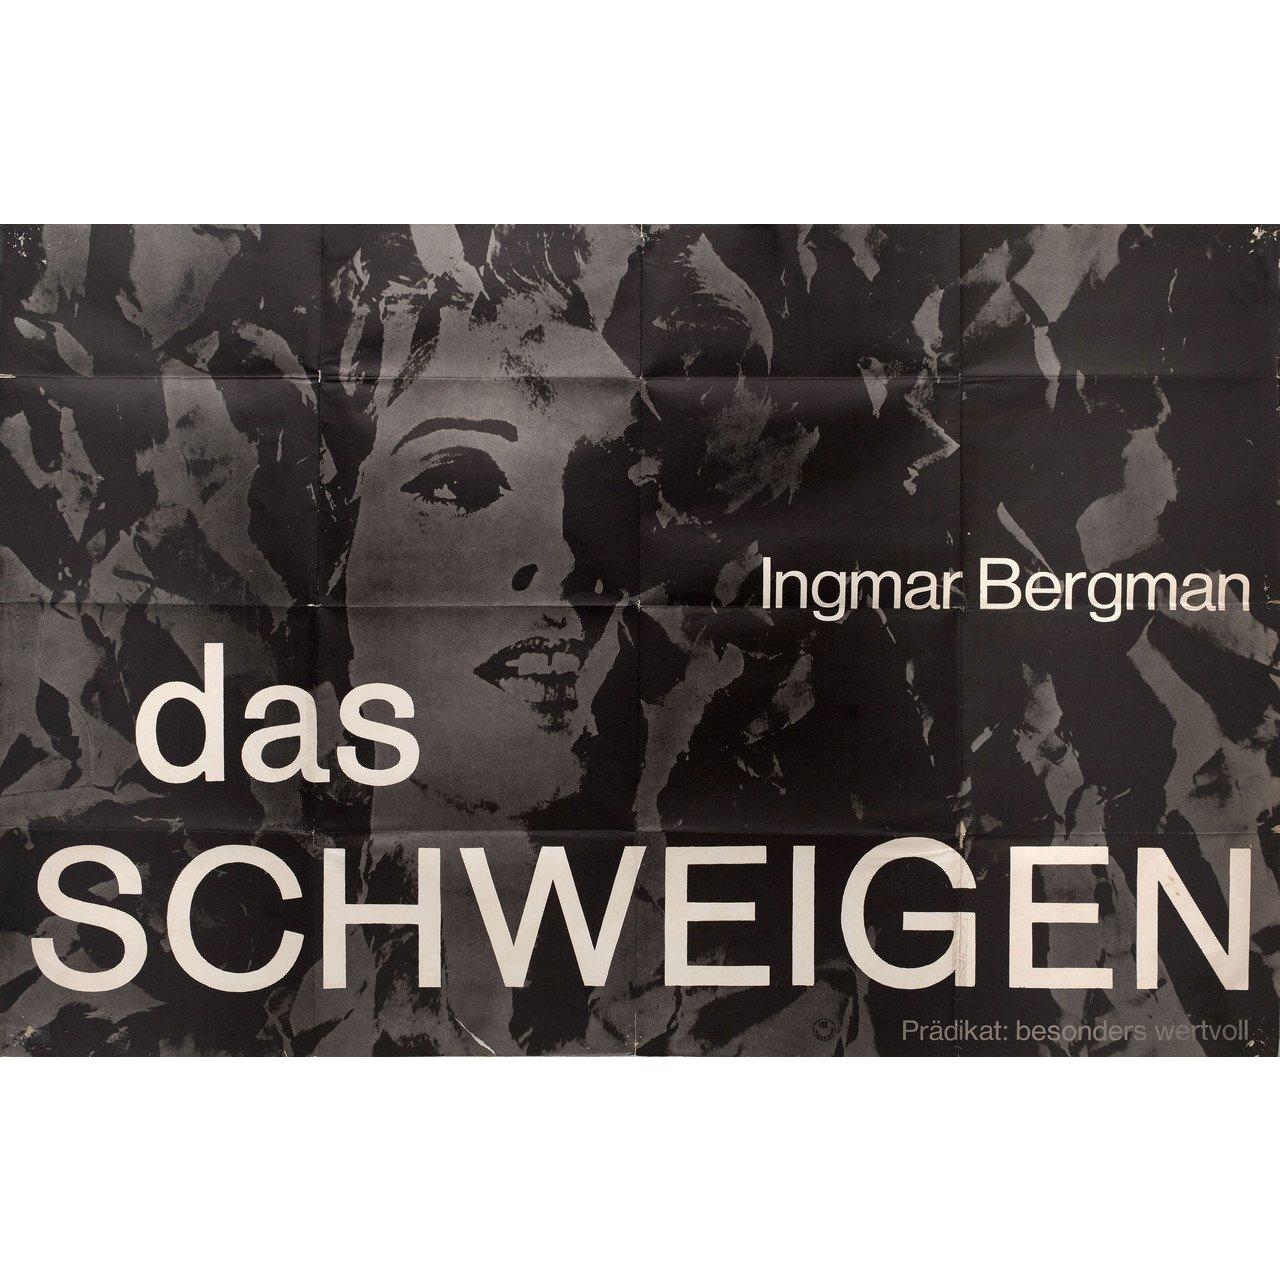 Original 1963 German A0 poster by Dorothea Fischer-Nosbisch for. Fair-good condition, folded with tape on back and pinholes. Many original posters were issued folded or were subsequently folded. Please note: the size is stated in inches and the